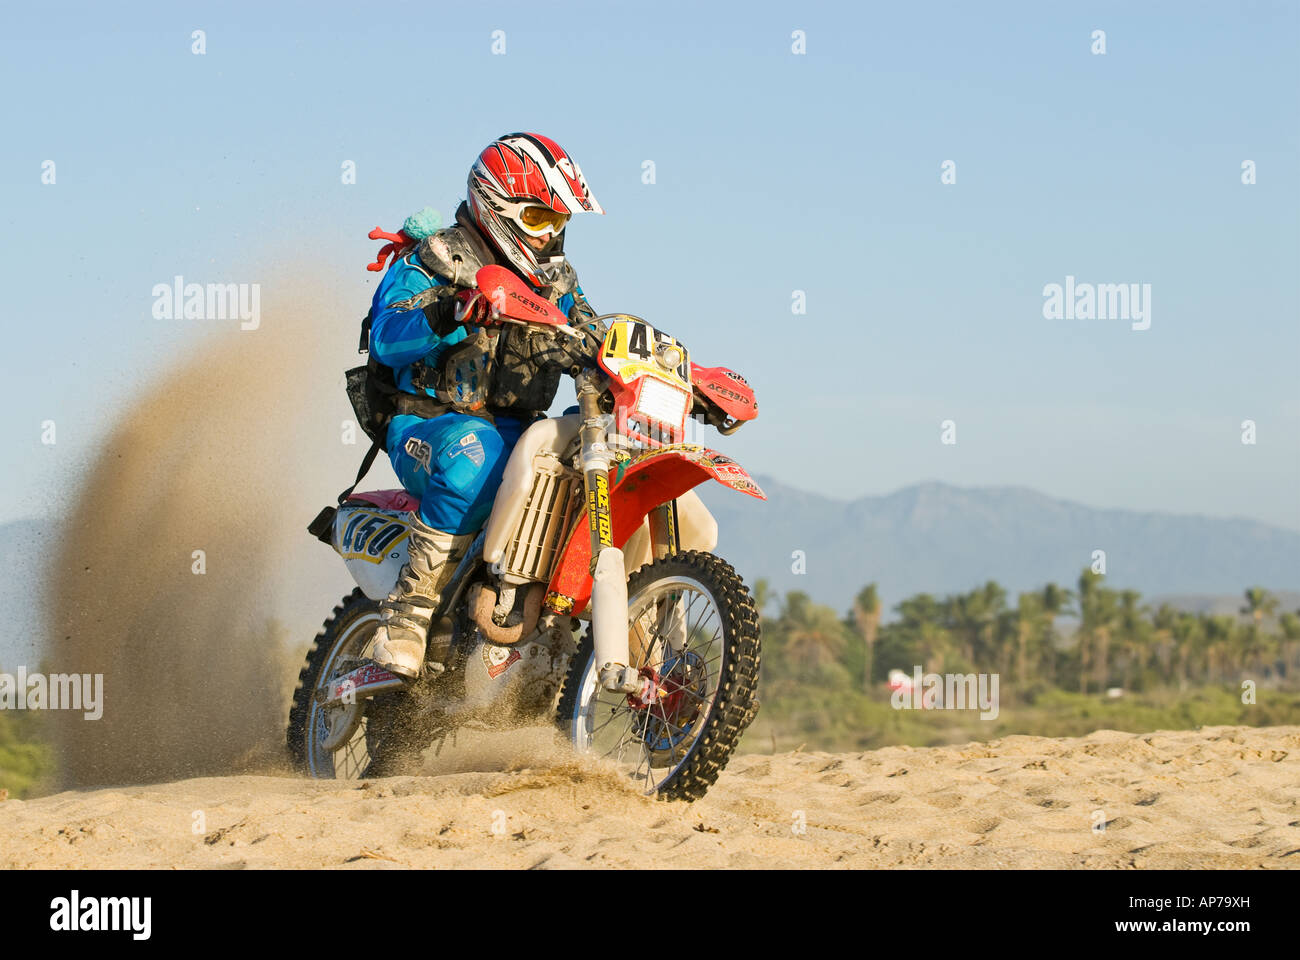 Male motorcycle rider riding on sandy beach in Baja California, Mexico Stock Photo